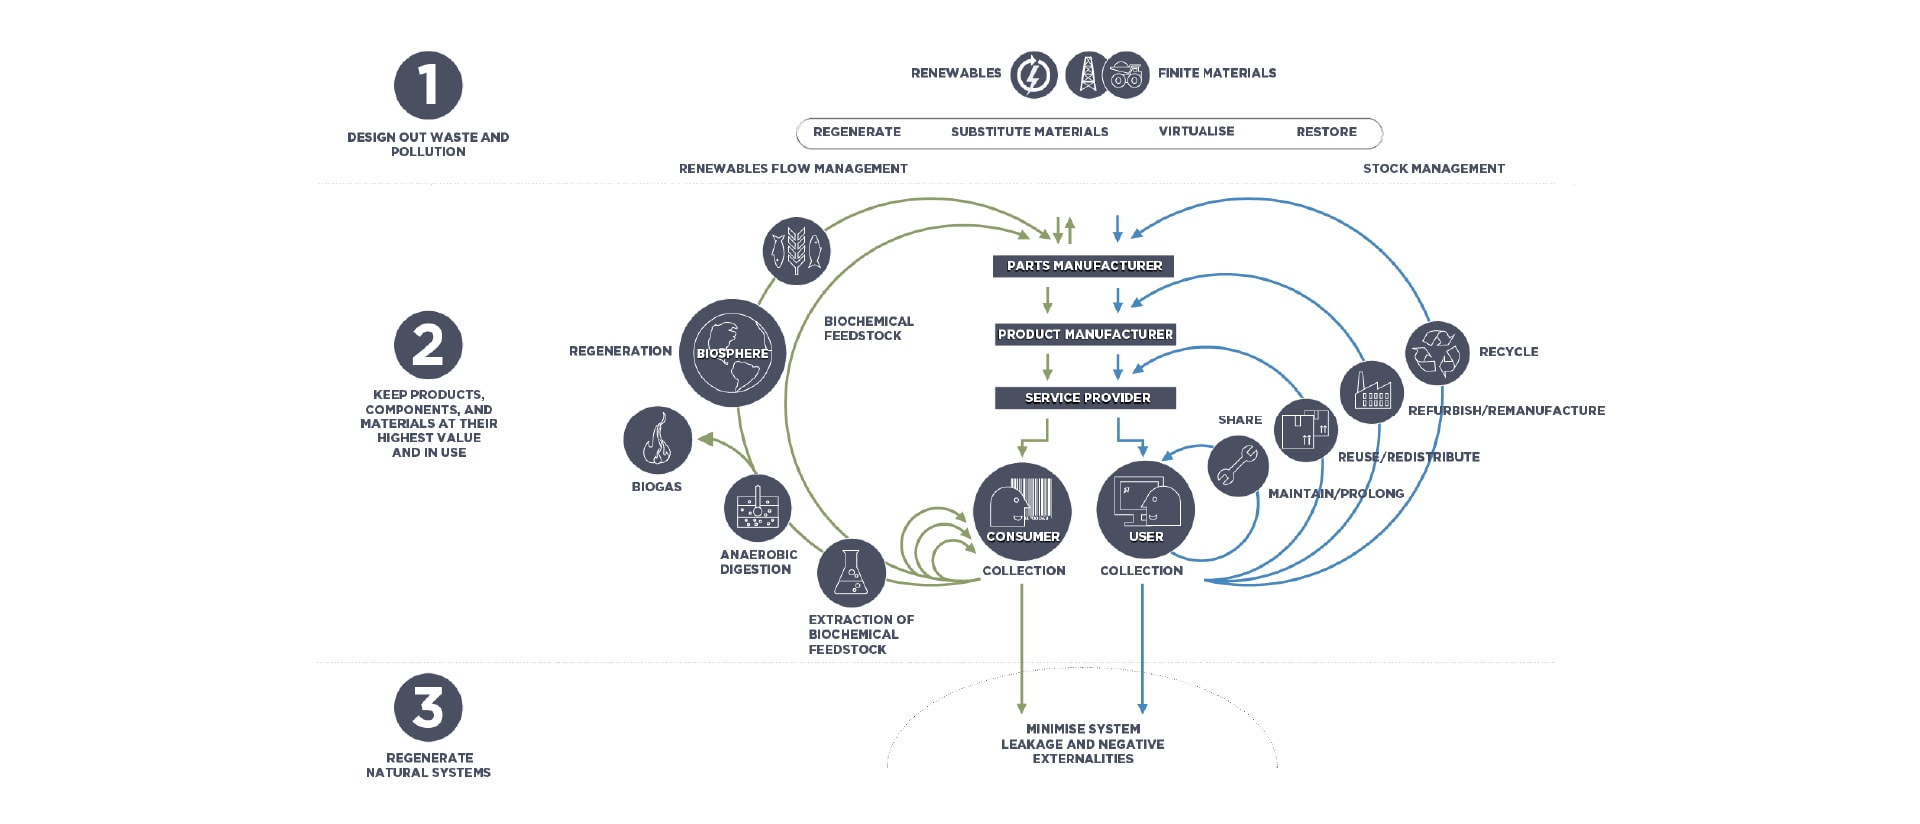 Graphic showing how to design out waste and pollution, keep products, components, and materials at their highest value and in use, and regenerate natural systems.